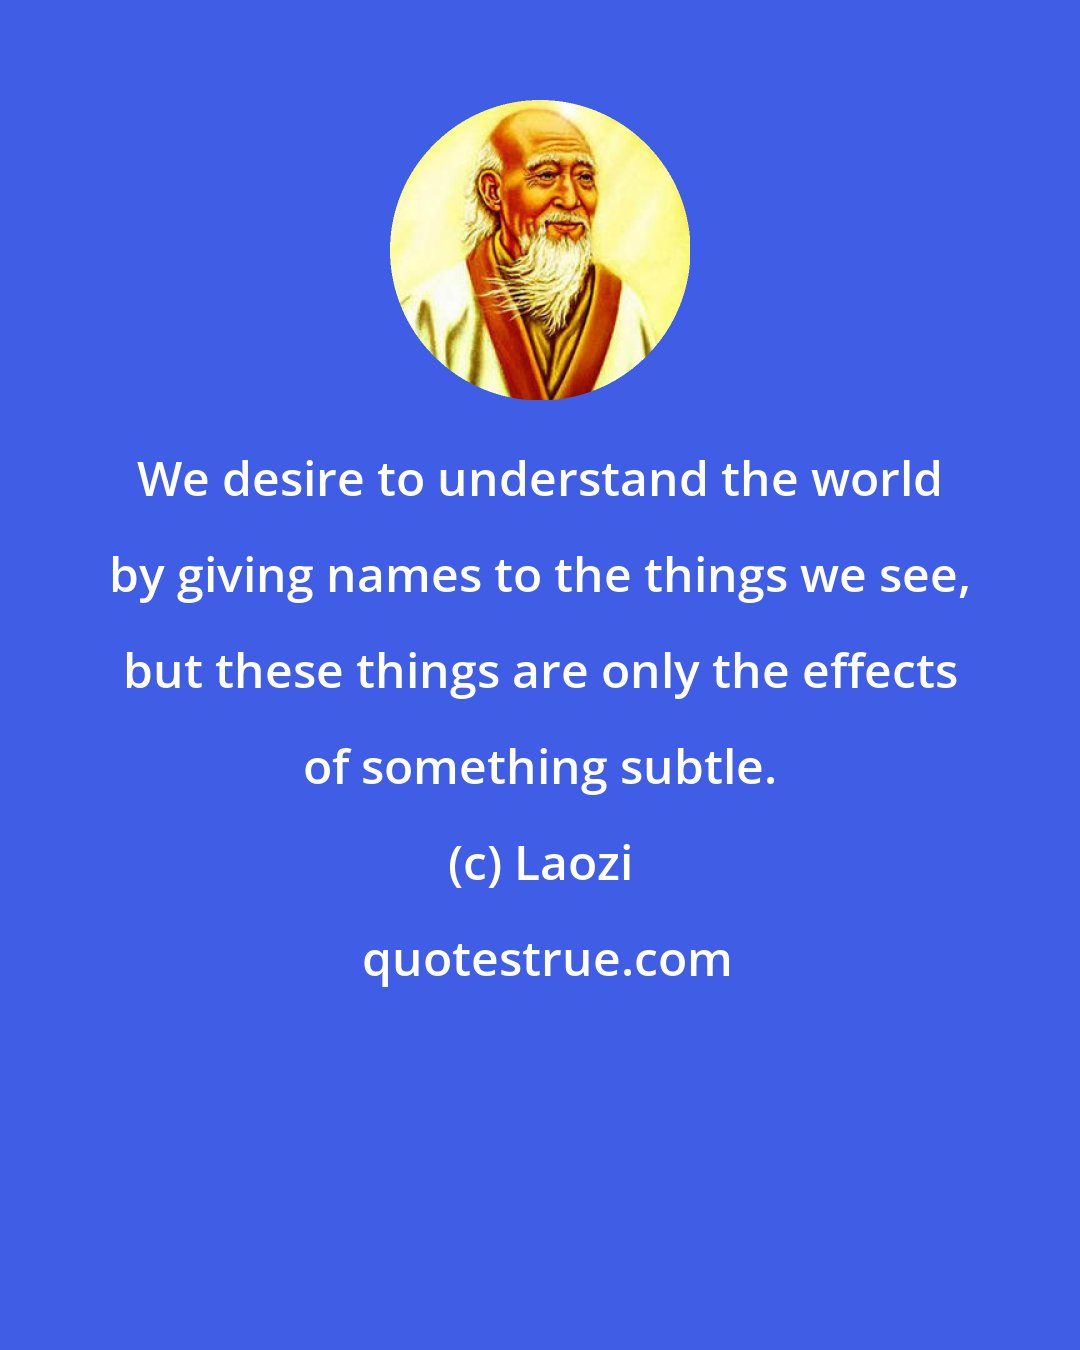 Laozi: We desire to understand the world by giving names to the things we see, but these things are only the effects of something subtle.